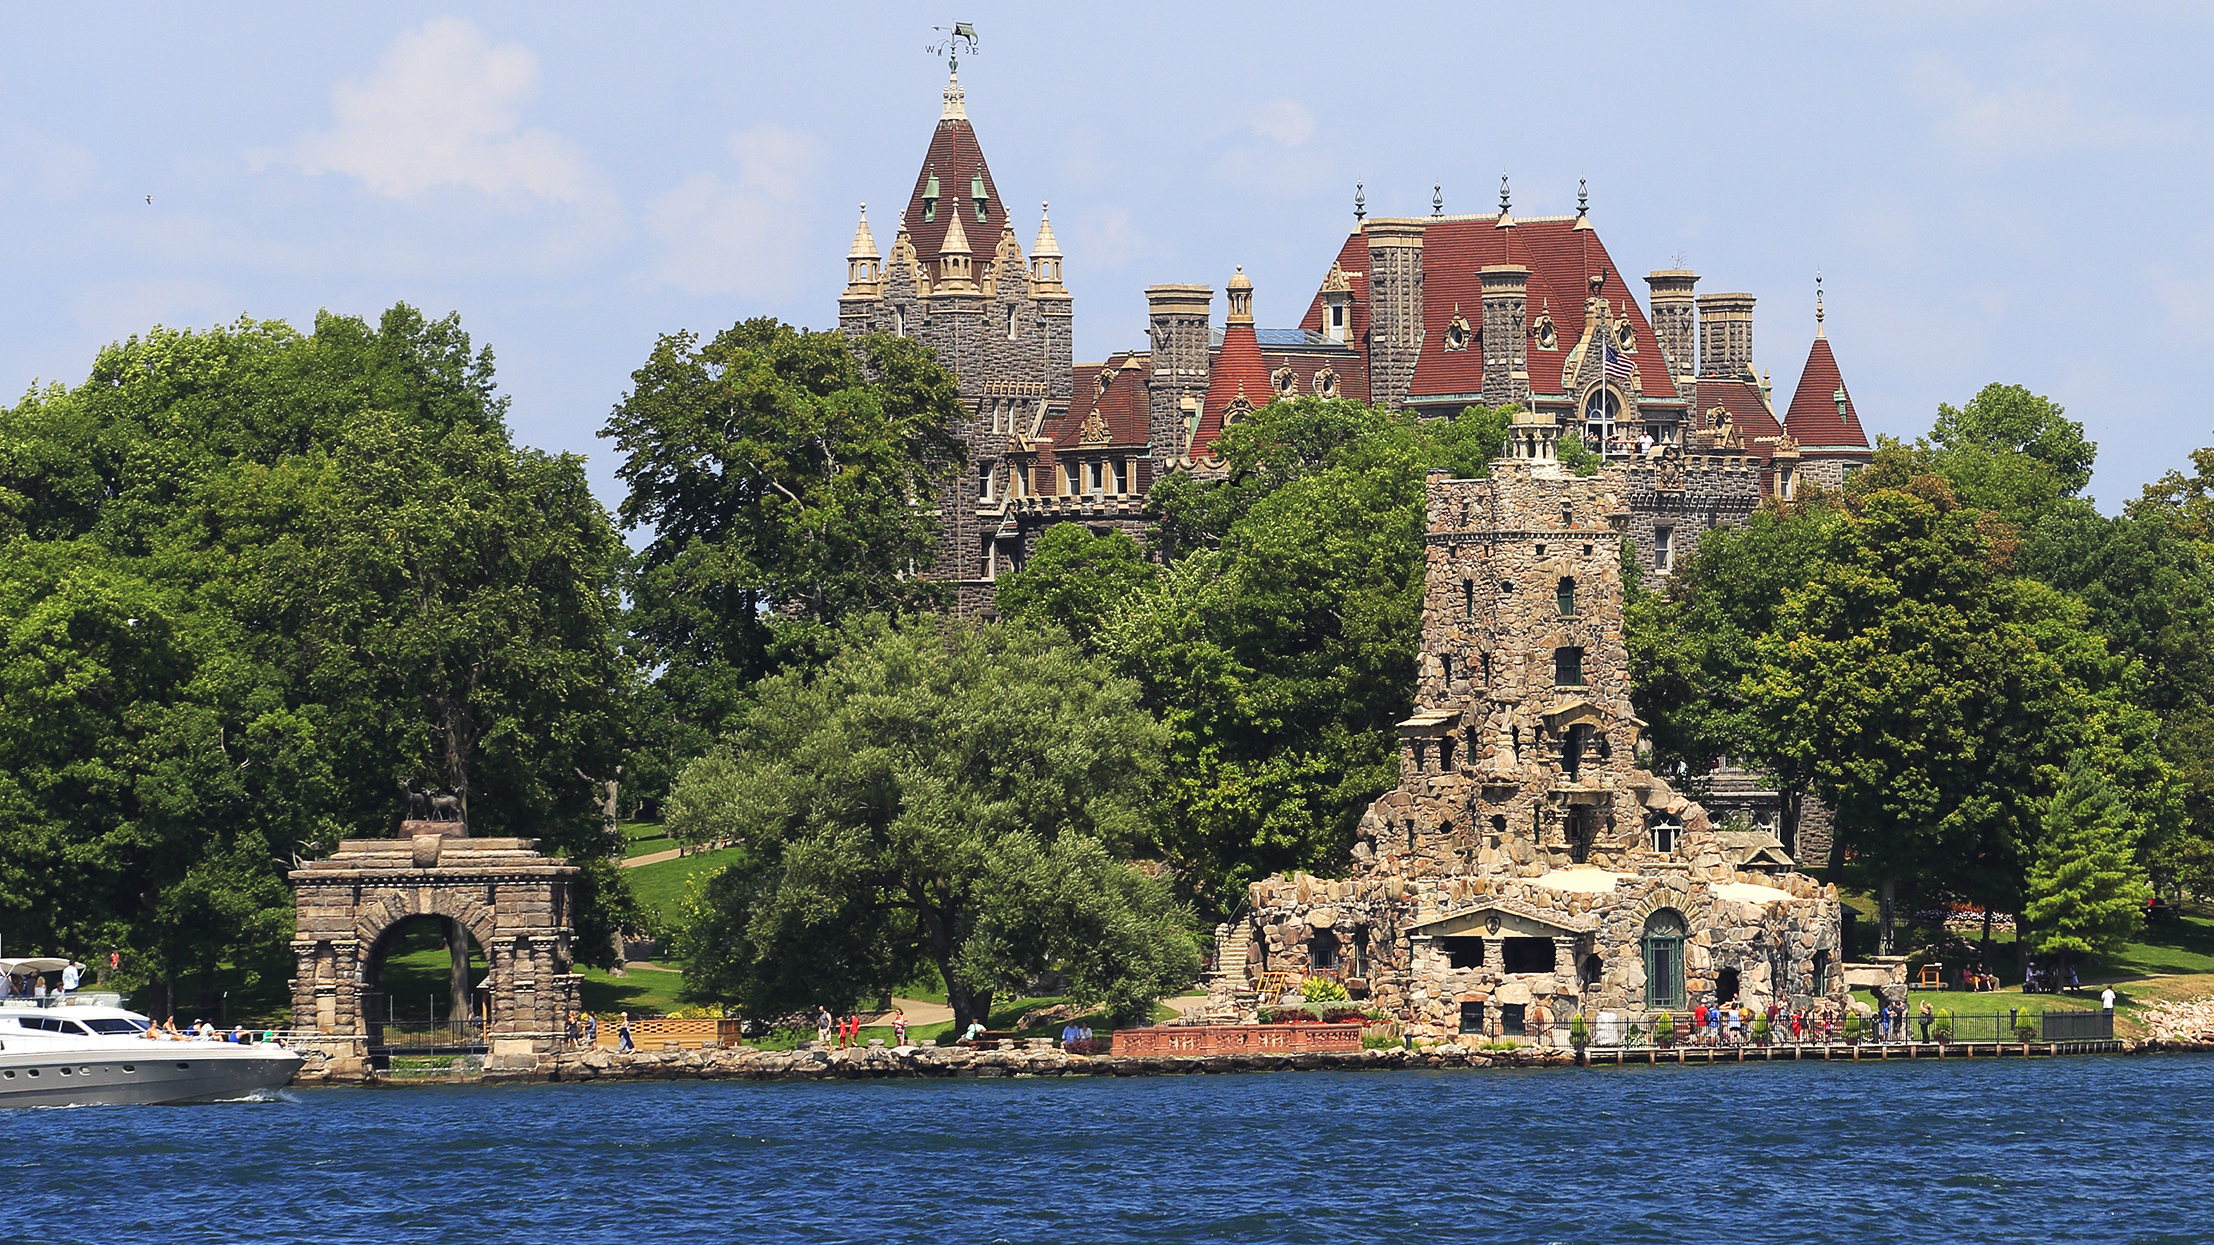 One of New York's many castles in the US, Boldt Castle rises from an island in Alexandria Bay